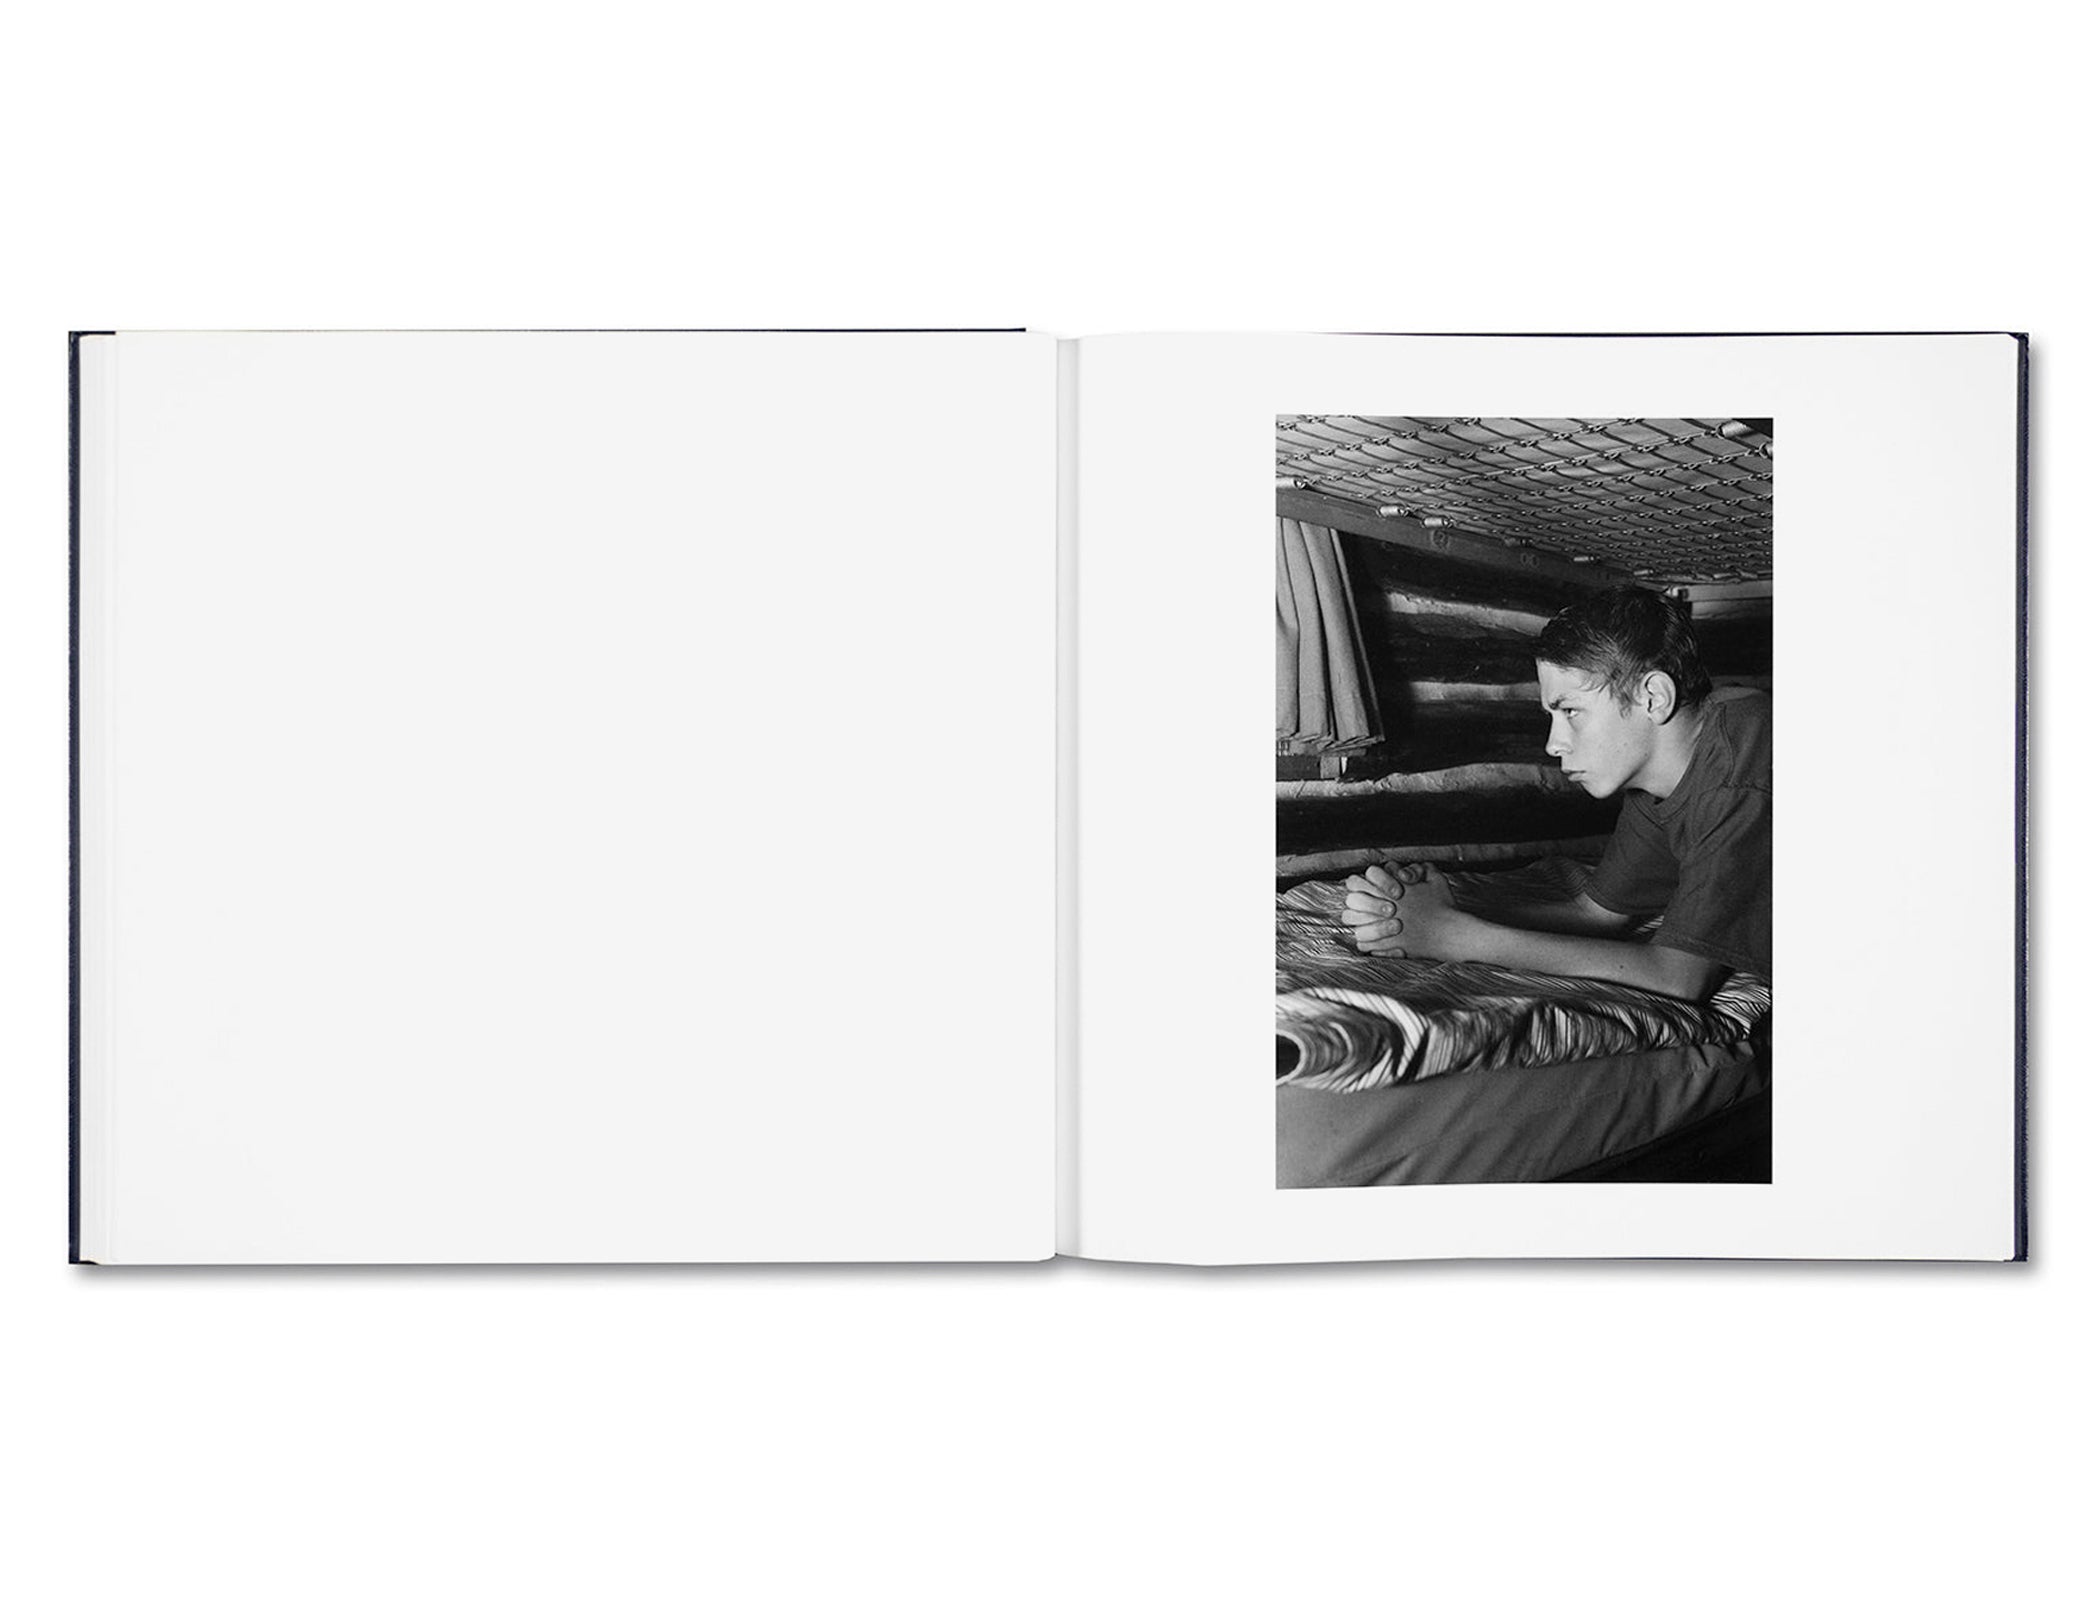 SOME SAY ICE by Alessandra Sanguinetti [SIGNED]